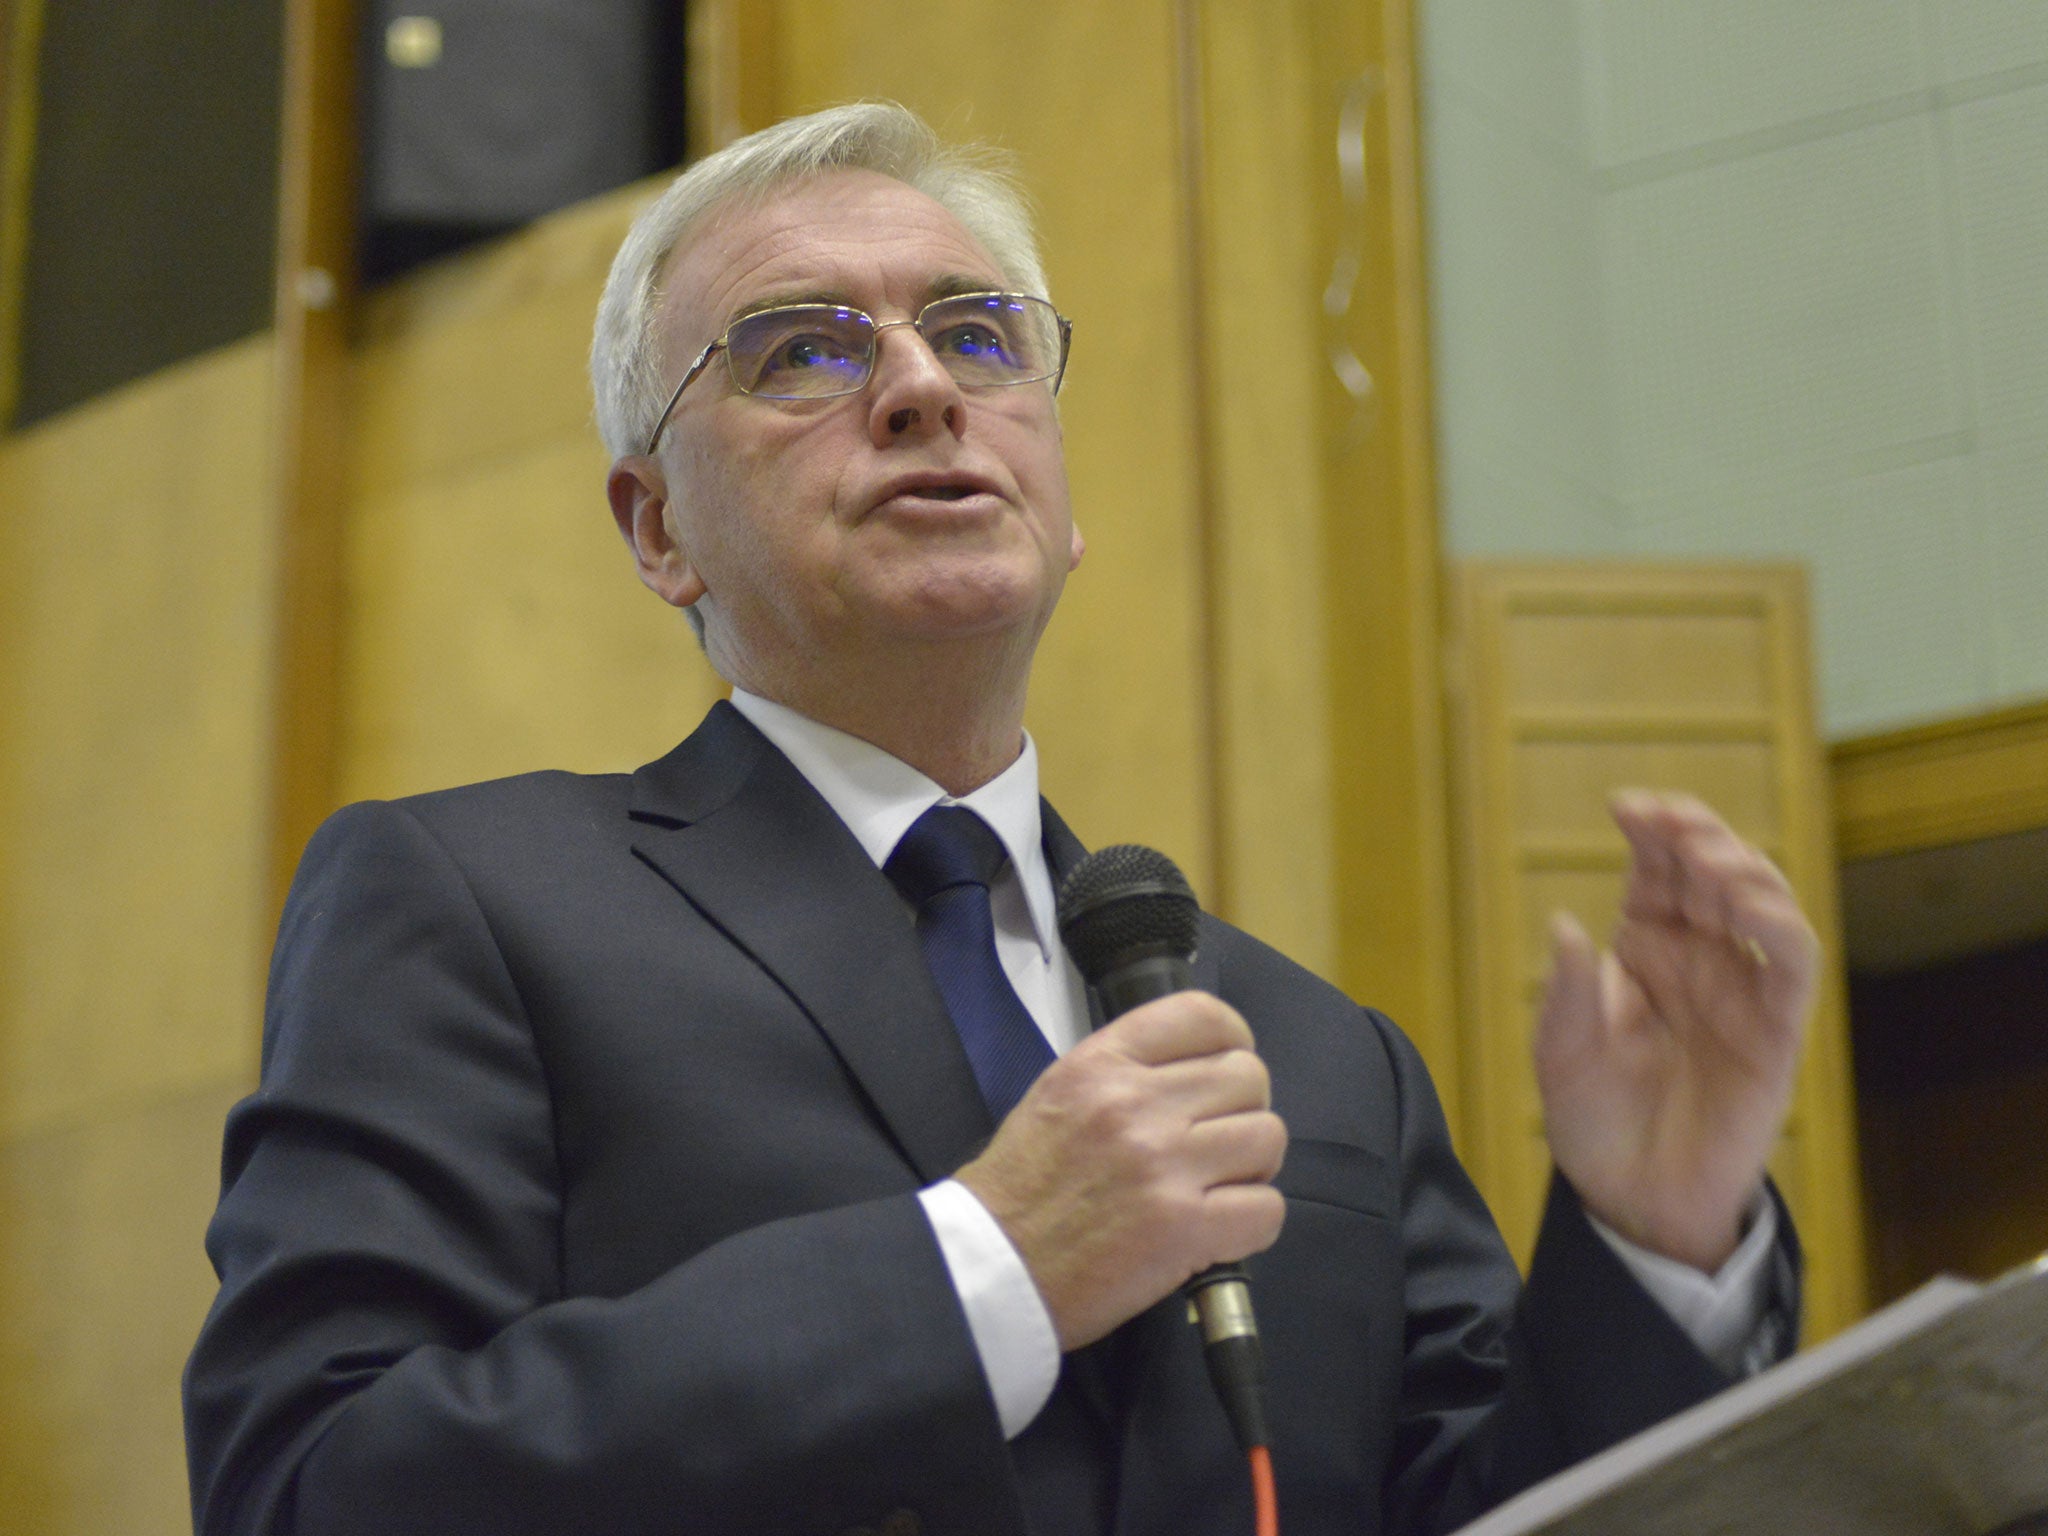 John McDonnell speaking at the 'Building an Economy to Serve People and Not Profit', an alternative economics event in Manchester, in January